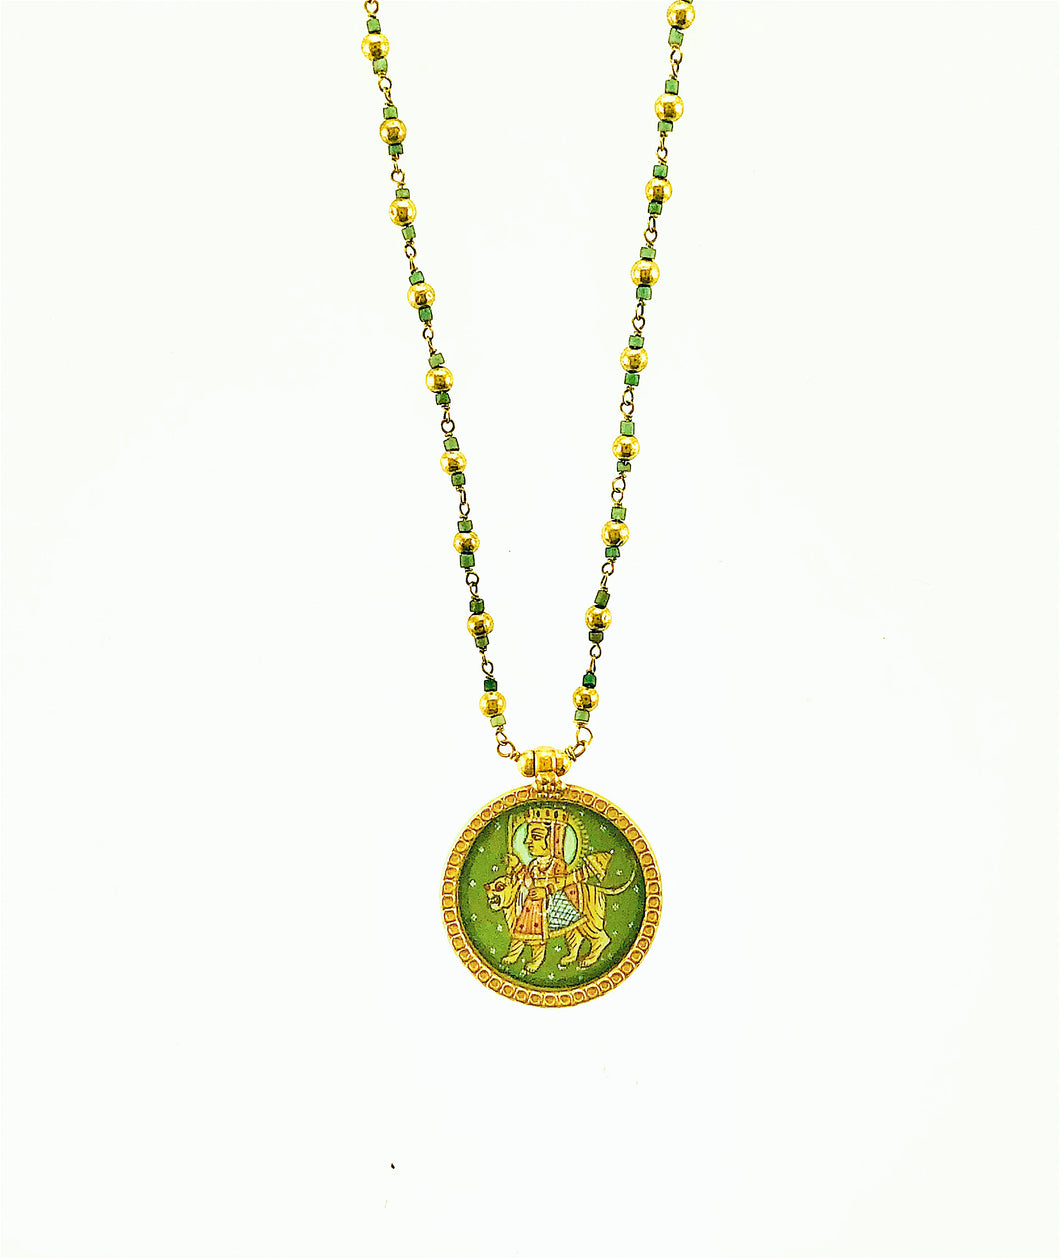 18K Hand-painted Durgha Pendant on 18k twisted Turquoise chain.